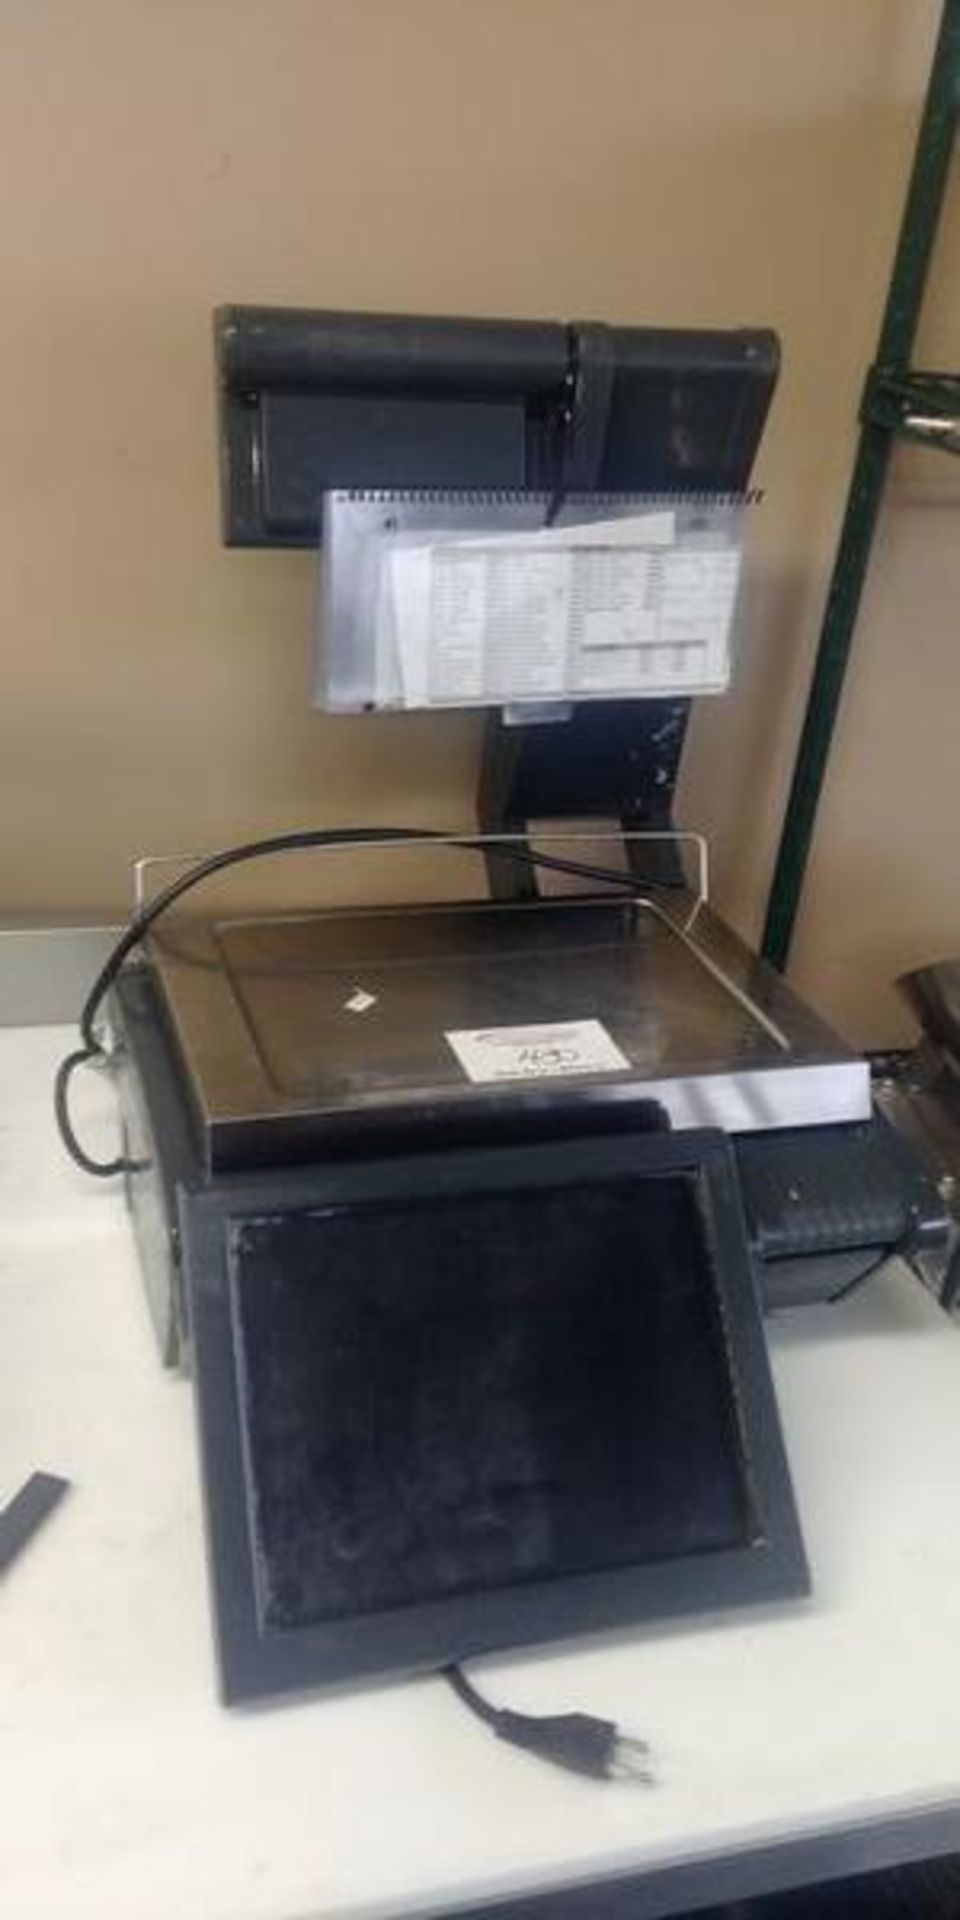 Bizerba Weighing Scale with Readout and Printer - Model KH200